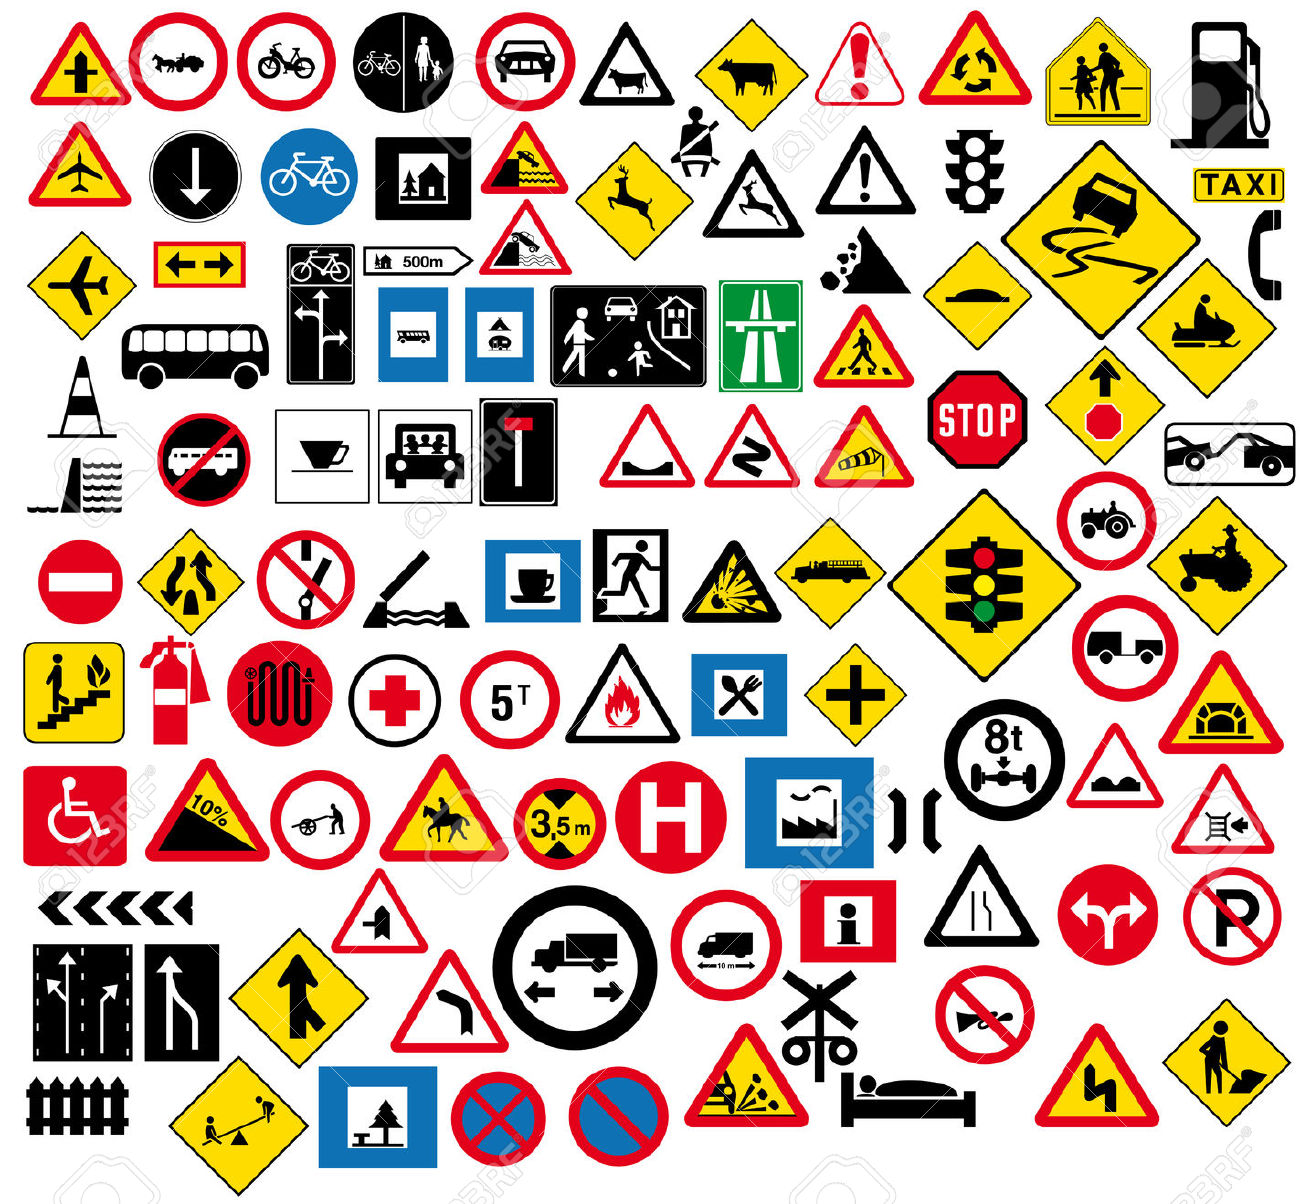 Obey traffic rules clipart.